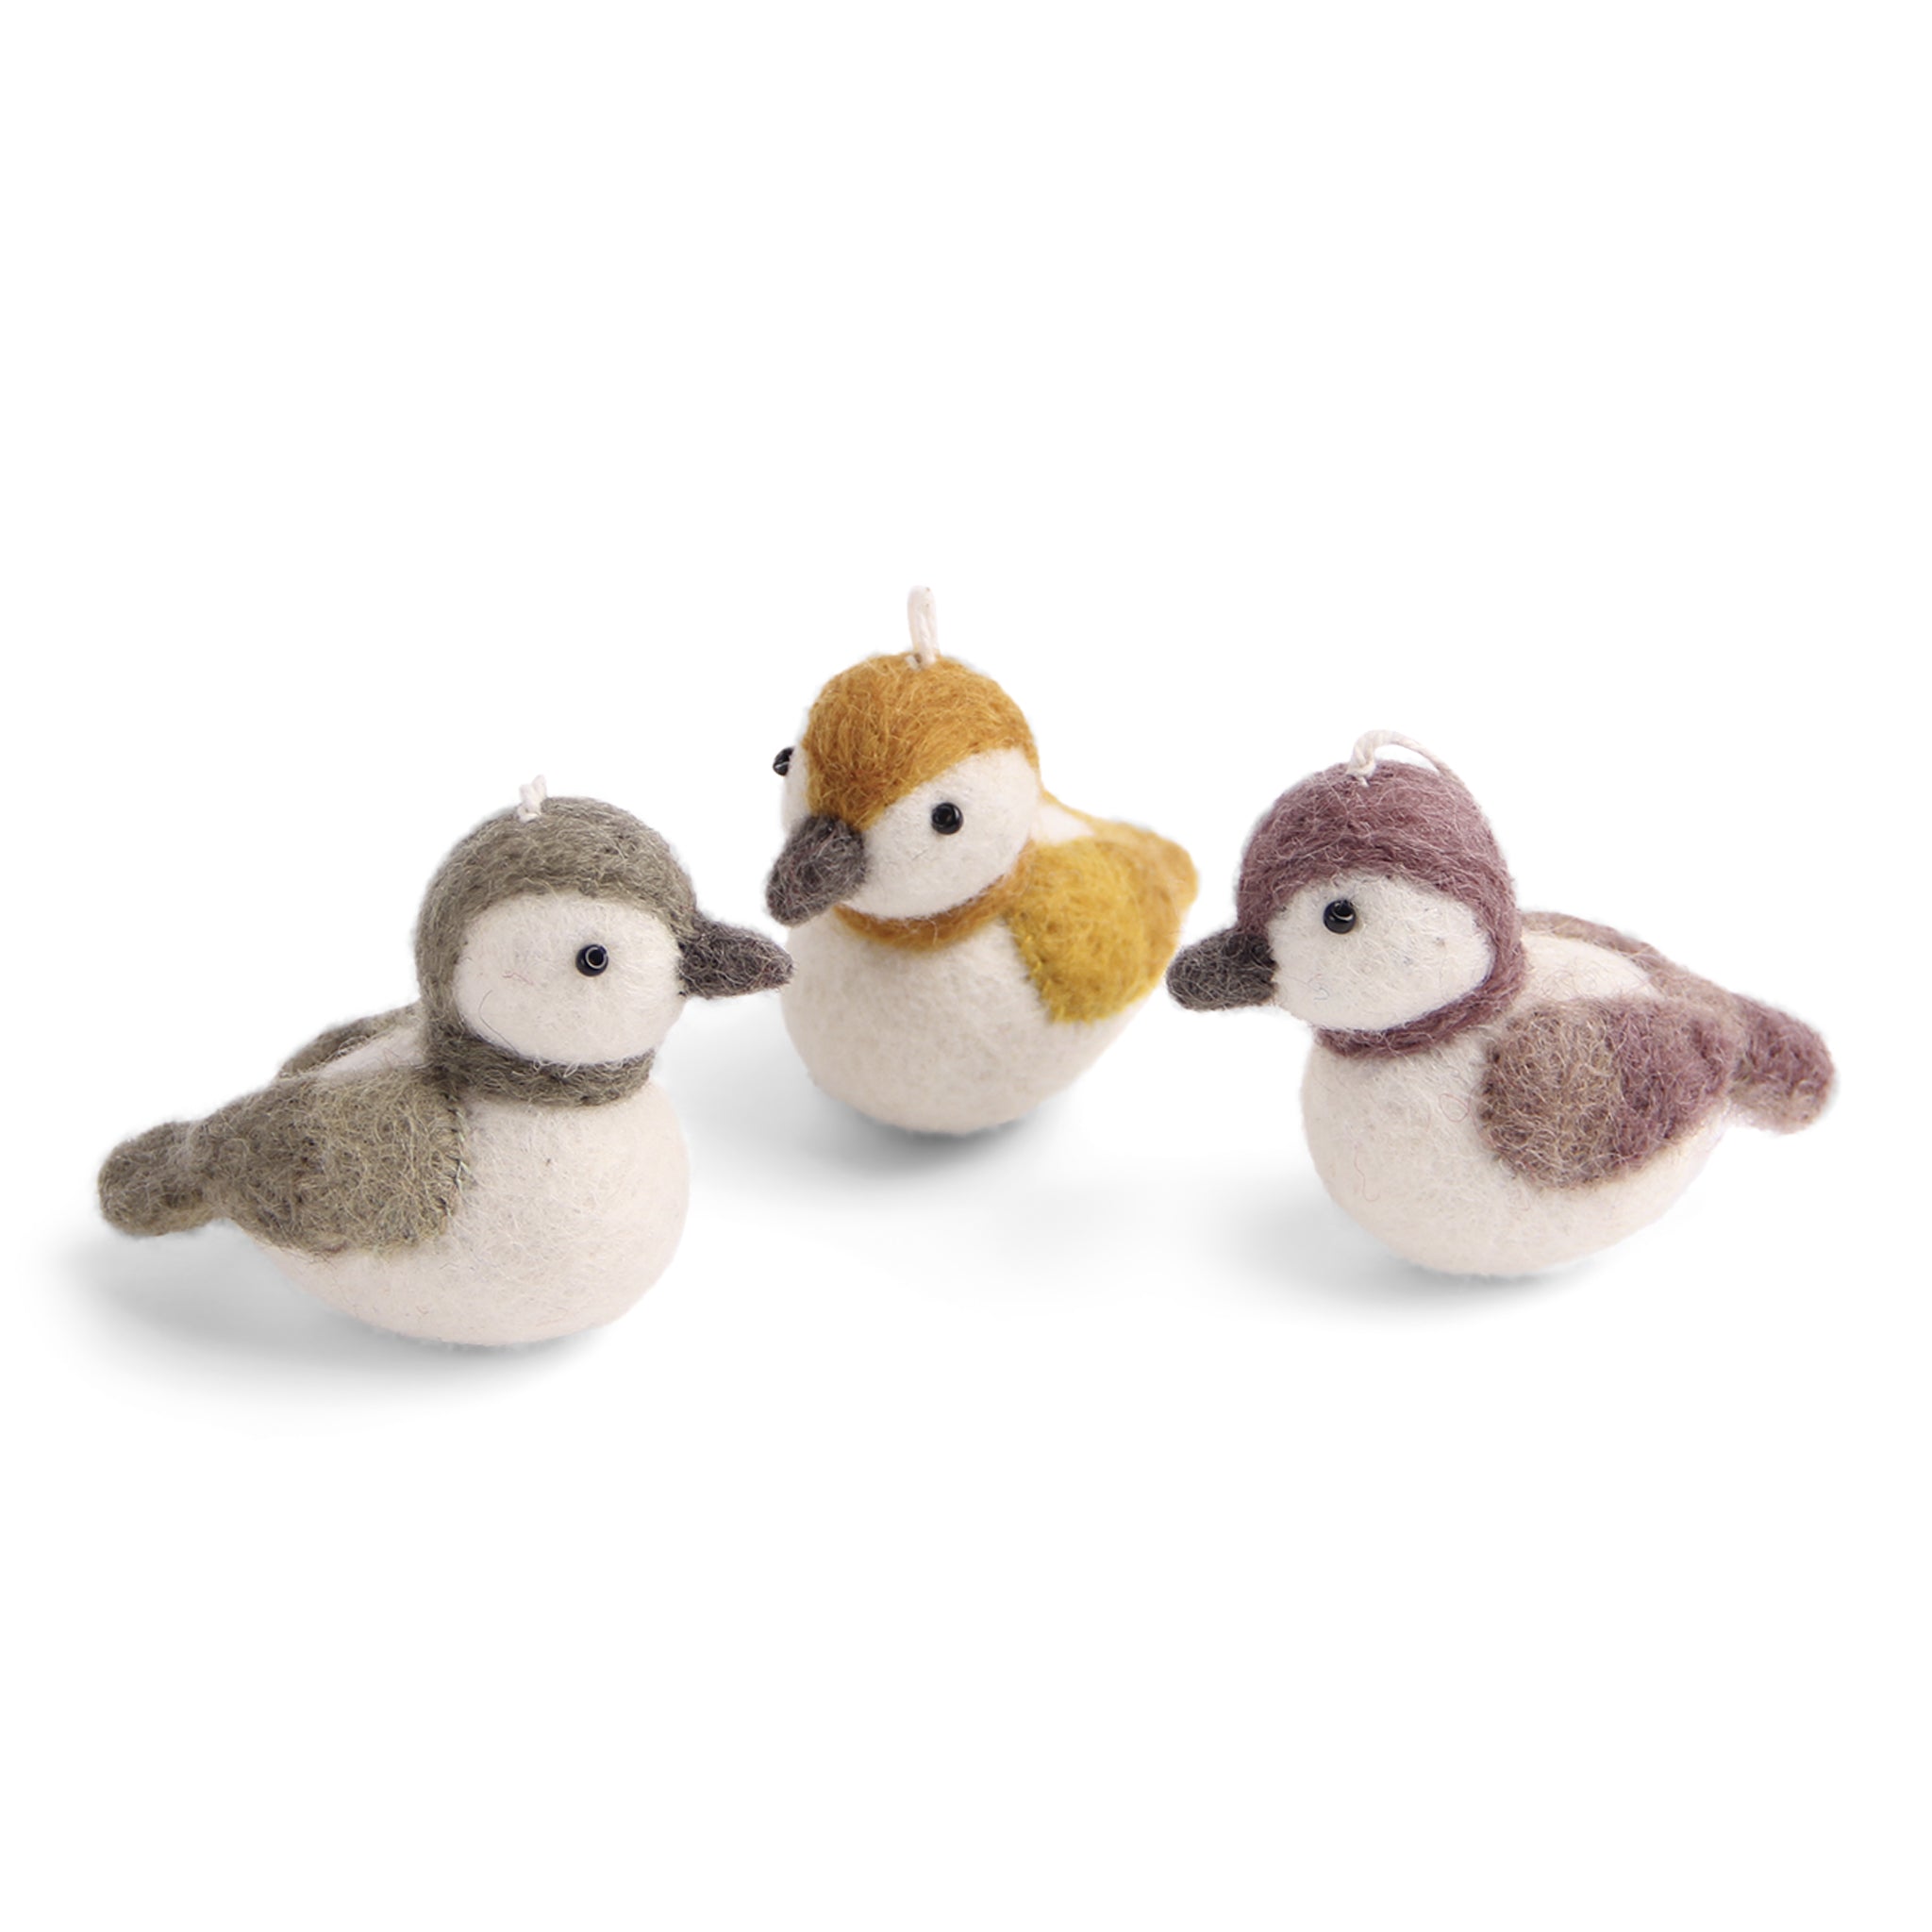 Mini Snowman with scarf - Set of 3